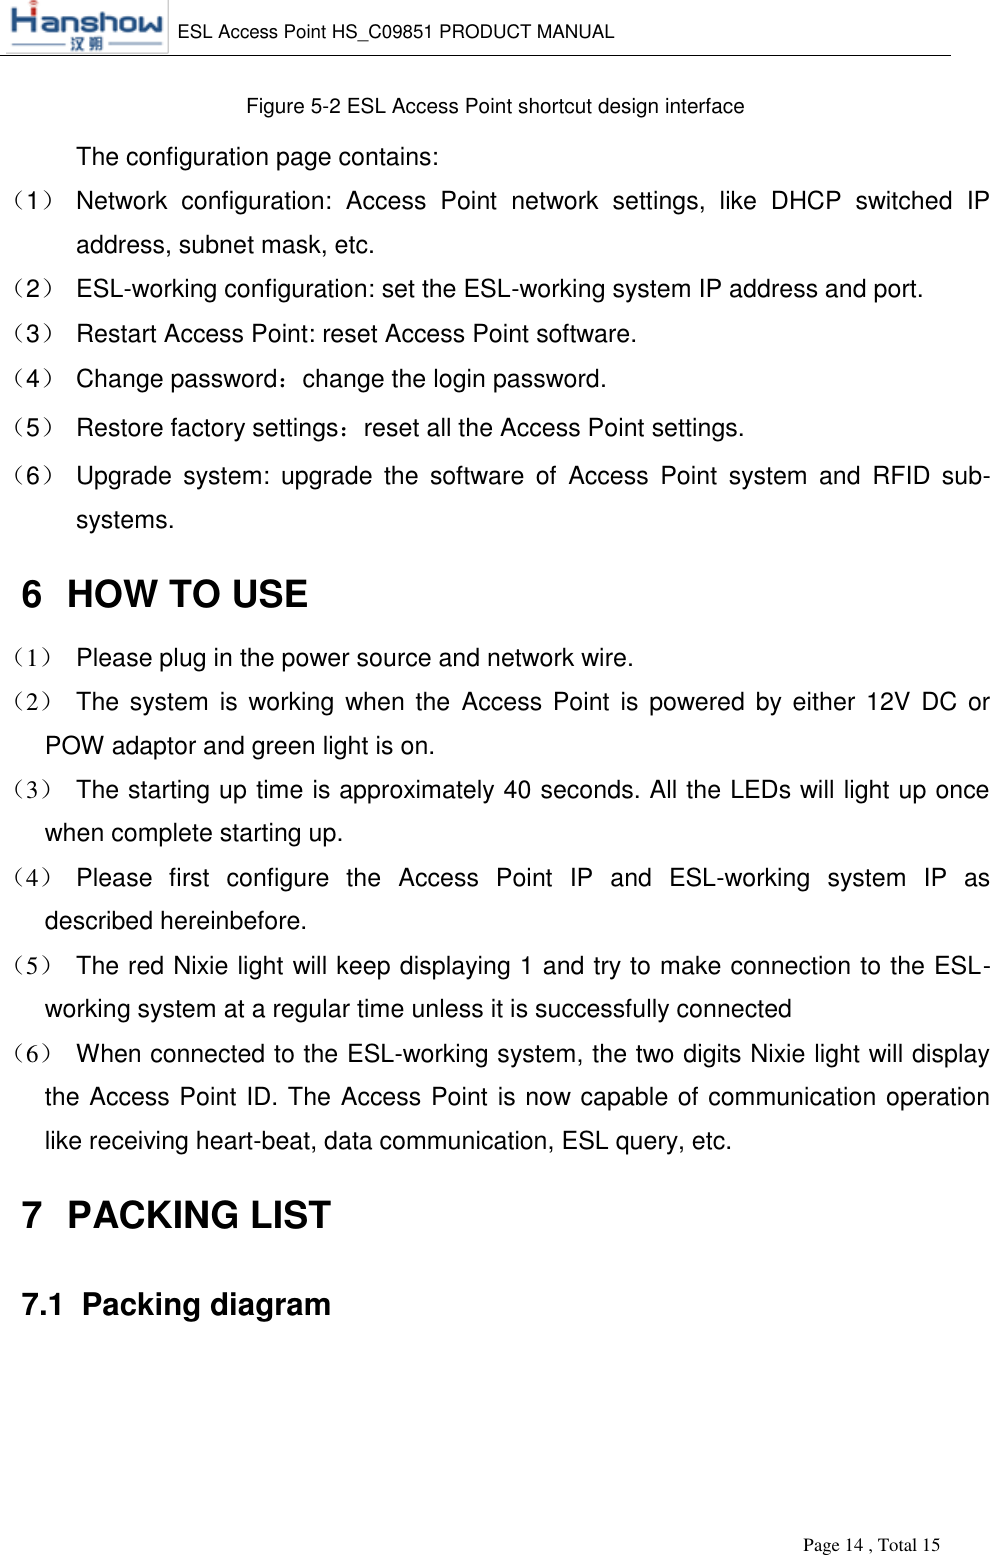    ESL Access Point HS_C09851 PRODUCT MANUAL          Page 14 , Total 15       Figure 5-2 ESL Access Point shortcut design interface   The configuration page contains: （1） Network  configuration:  Access  Point  network  settings,  like  DHCP  switched  IP address, subnet mask, etc. （2） ESL-working configuration: set the ESL-working system IP address and port. （3） Restart Access Point: reset Access Point software. （4） Change password：change the login password. （5） Restore factory settings：reset all the Access Point settings. （6） Upgrade  system:  upgrade  the  software  of  Access  Point  system  and  RFID  sub-systems. 6  HOW TO USE （1） Please plug in the power source and network wire. （2） The  system  is  working when the  Access Point is powered by either 12V DC  or POW adaptor and green light is on. （3） The starting up time is approximately 40 seconds. All the LEDs will light up once when complete starting up. （4） Please  first  configure  the  Access  Point  IP  and  ESL-working  system  IP  as described hereinbefore. （5） The red Nixie light will keep displaying 1 and try to make connection to the ESL-working system at a regular time unless it is successfully connected （6） When connected to the ESL-working system, the two digits Nixie light will display the Access Point ID. The Access Point is now capable of communication operation like receiving heart-beat, data communication, ESL query, etc. 7  PACKING LIST 7.1  Packing diagram 